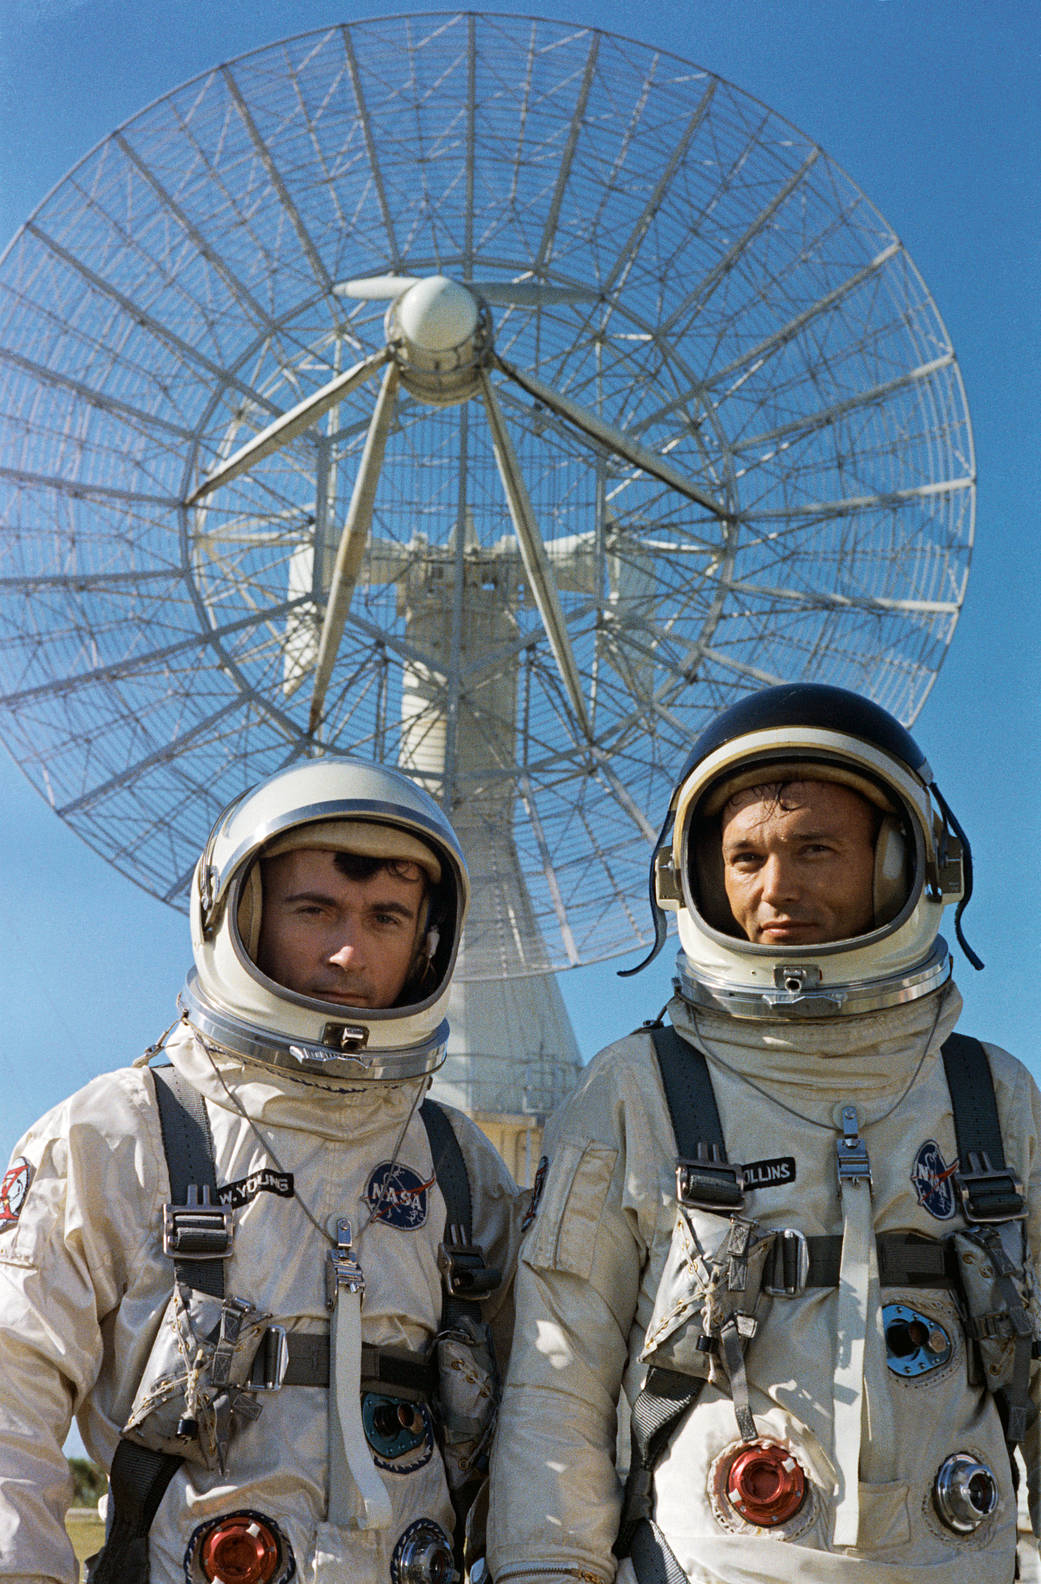 Two astronauts in spacesuits with helmets pose for photograph